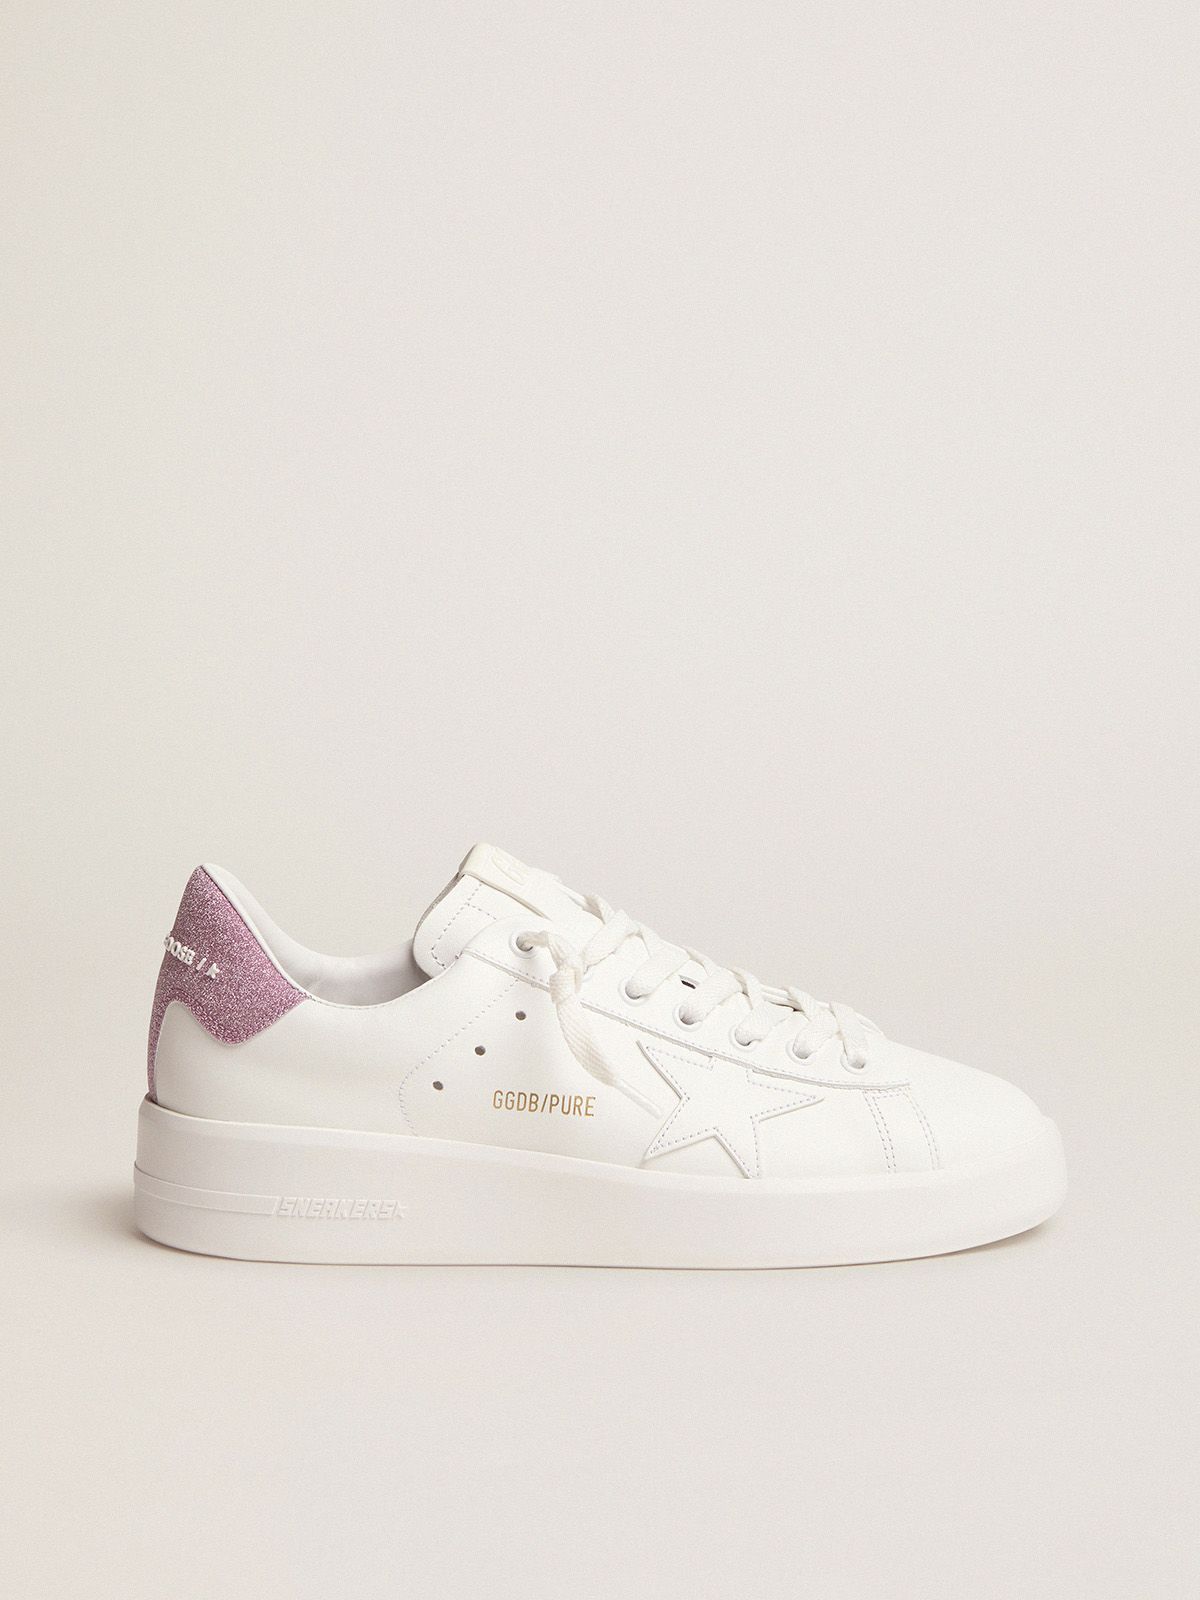 golden goose sneakers tab with glitter pink white Purestar heel in leather